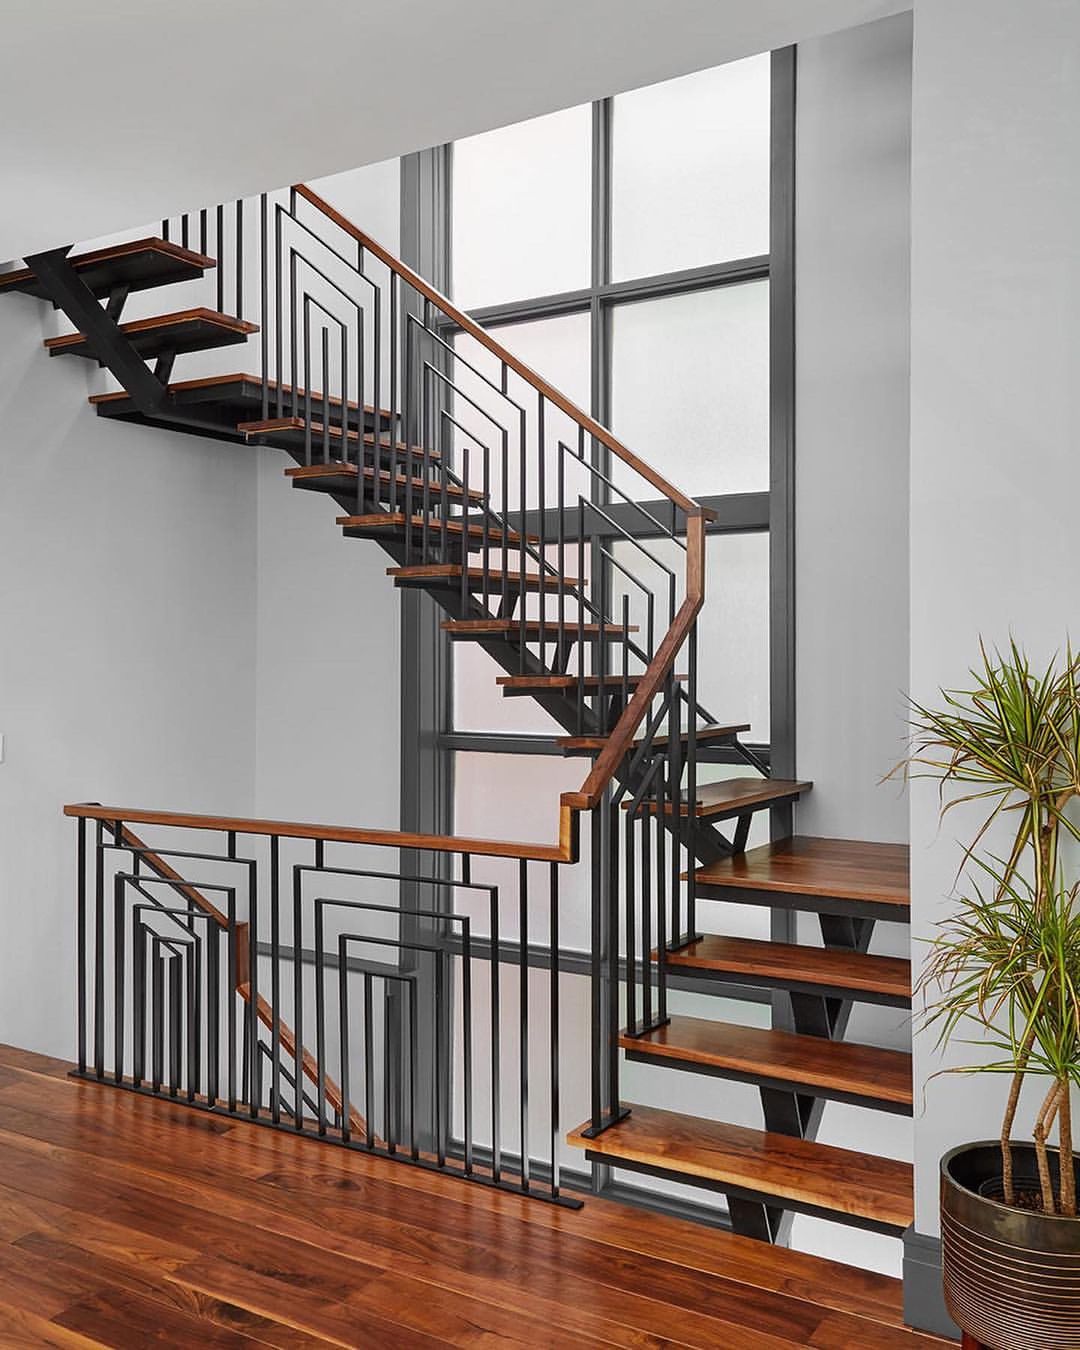 Modern Home Staircase. Photo by Instagram user @suzannkletziendesign